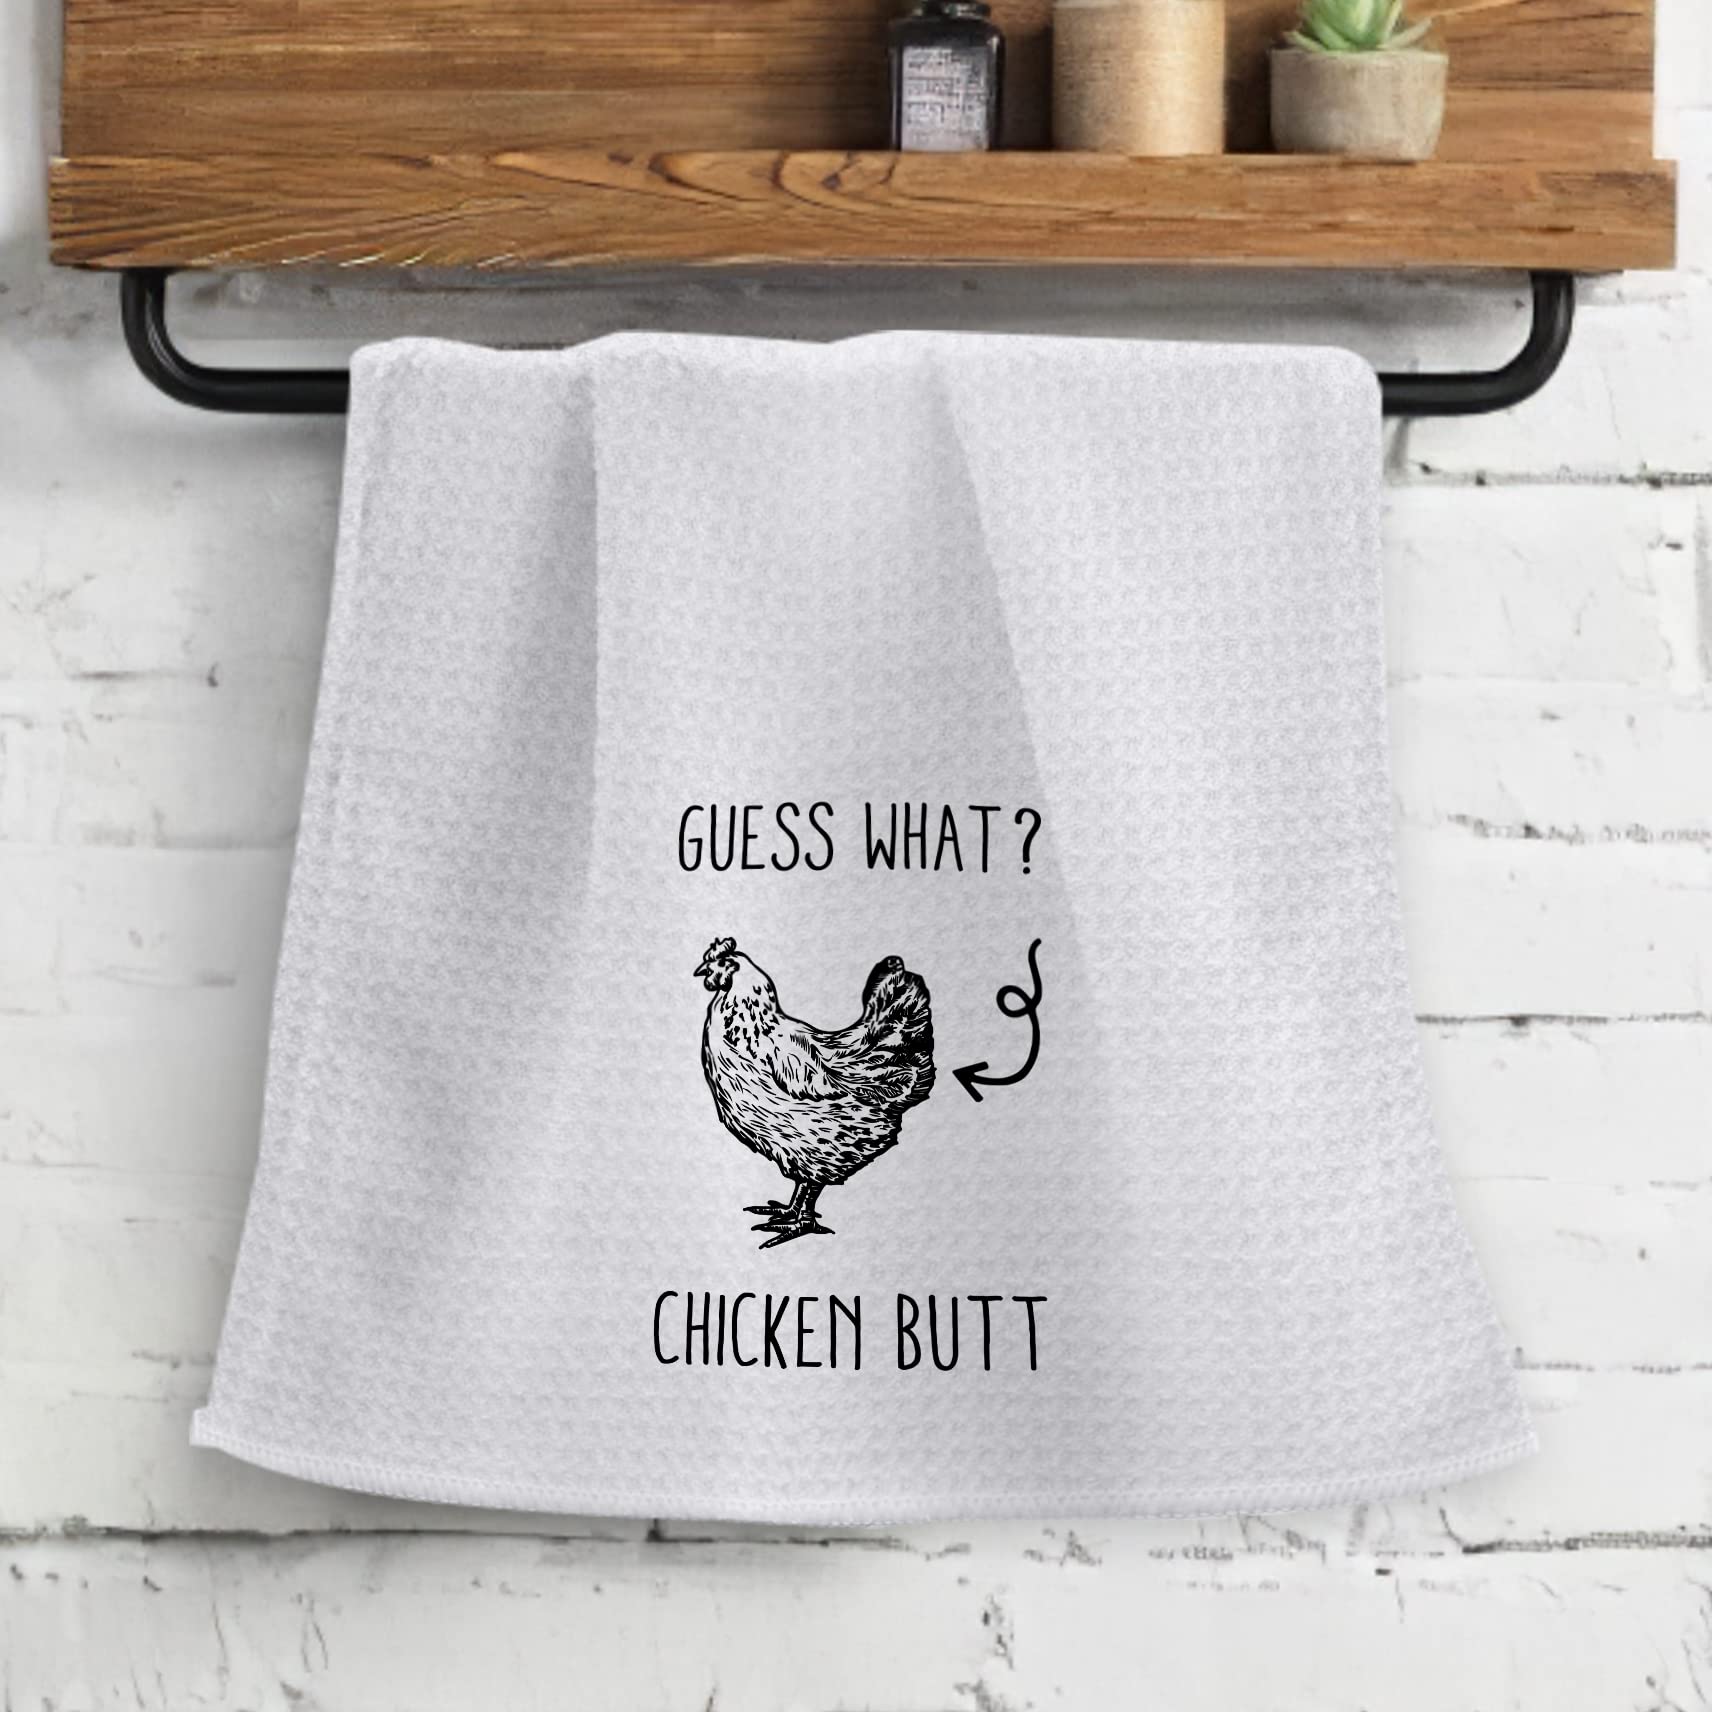 OHSUL Guess What Chicken Butt Highly Absorbent Kitchen Towels Dish Towels Dish Cloth,Funny Chicken Hand Towels Tea Towel for Bathroom Kitchen Decor,Chicken Lovers Farm Women Girls Gifts